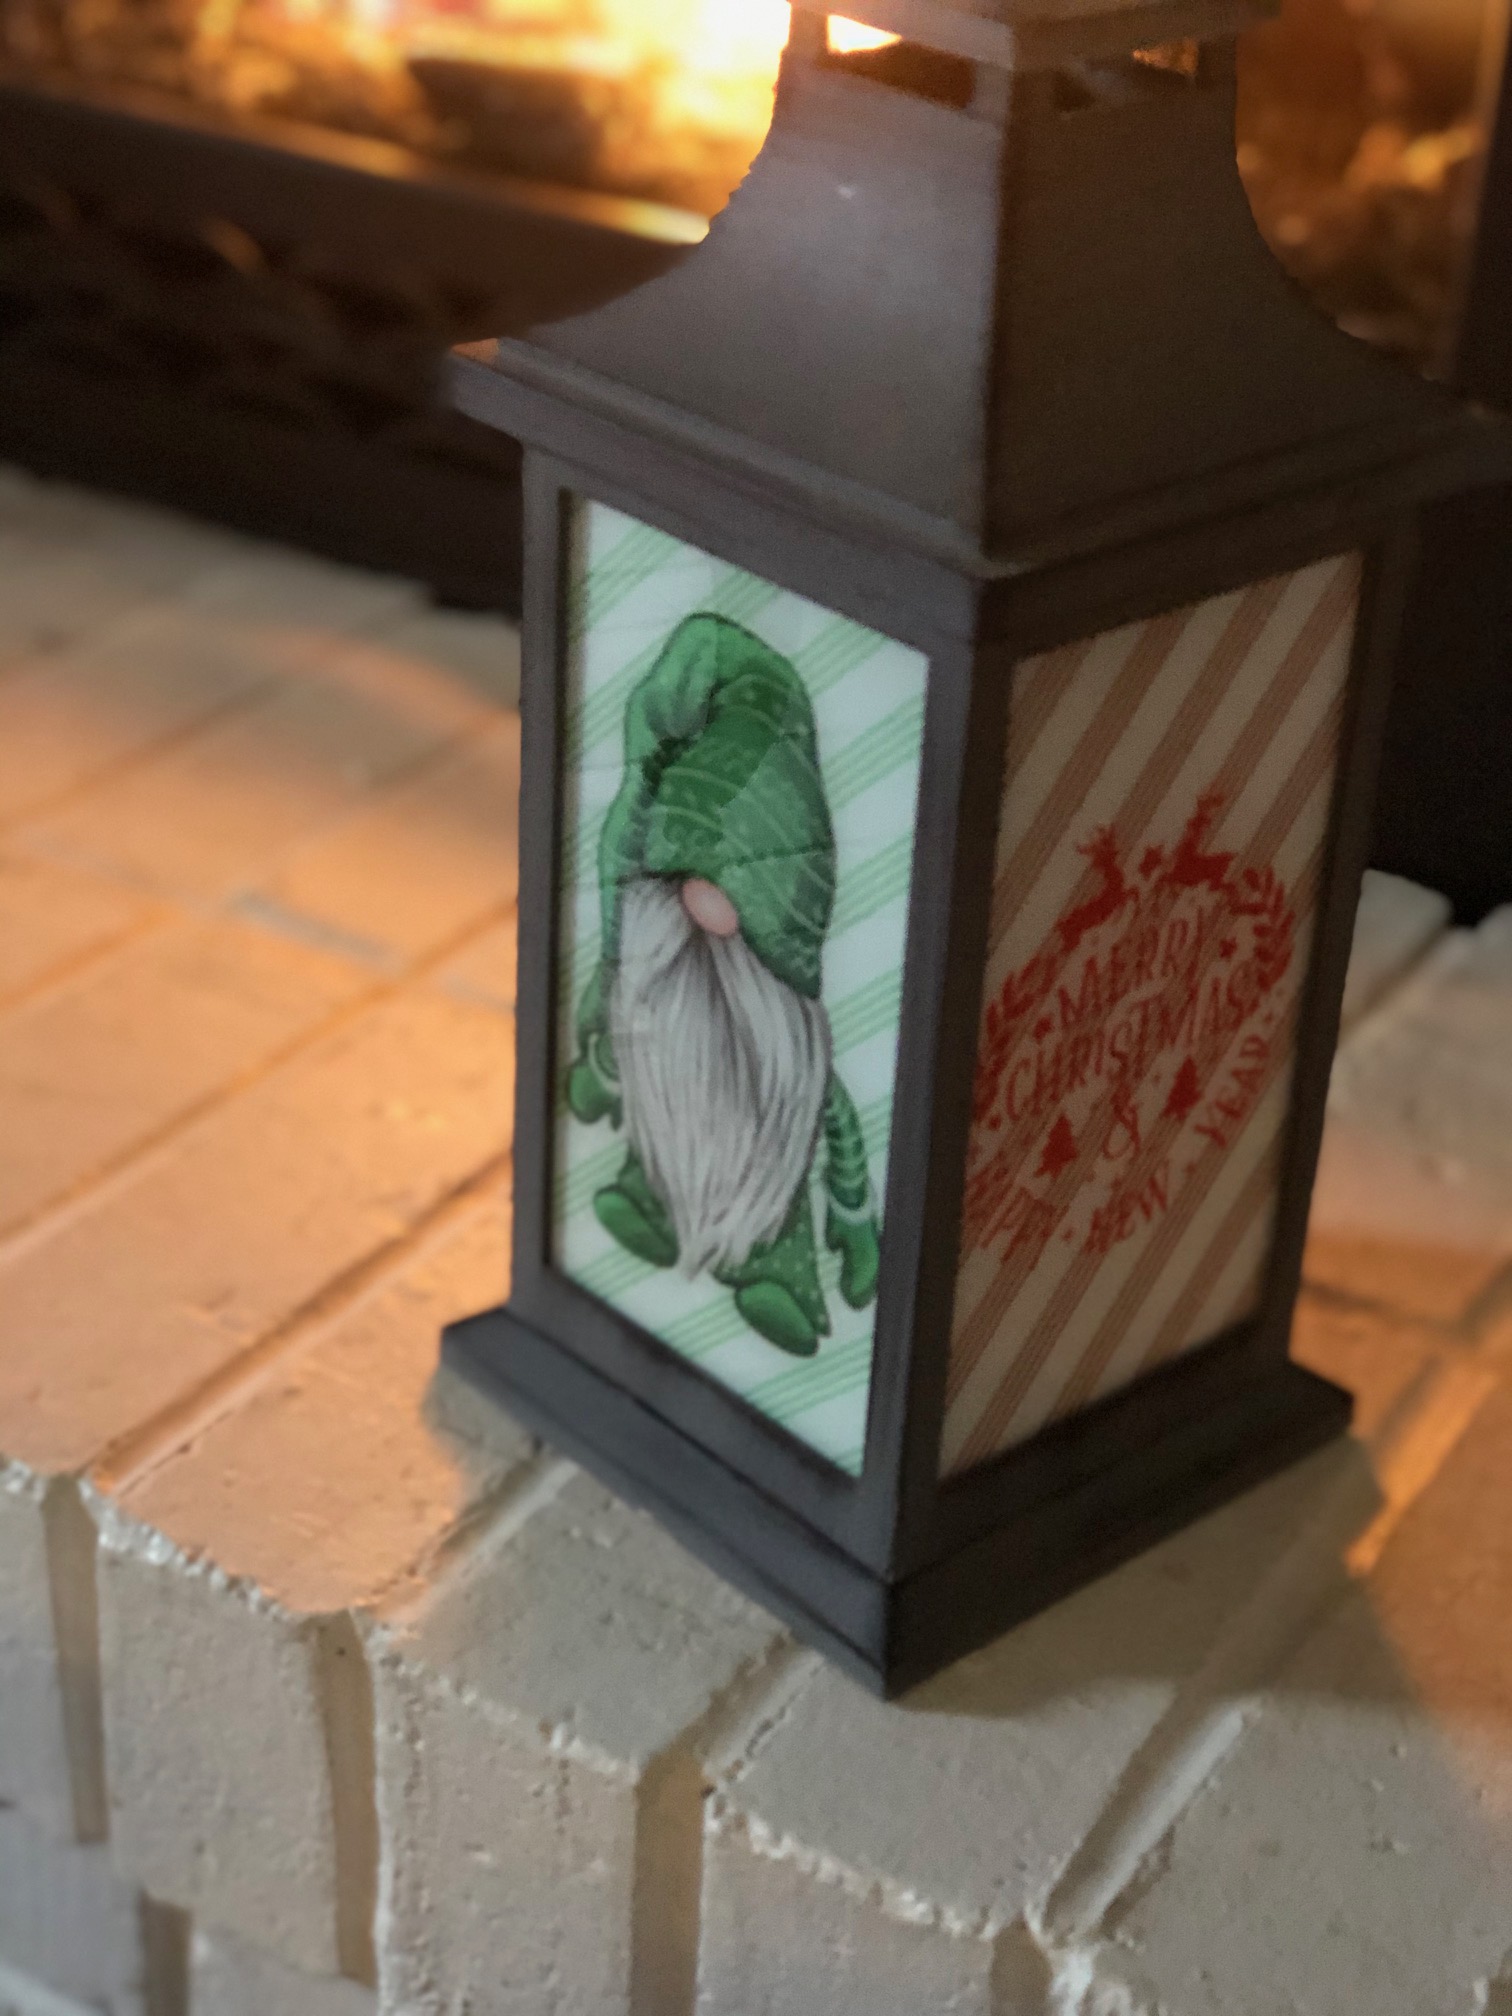 Follow this process for one way to customize lanterns